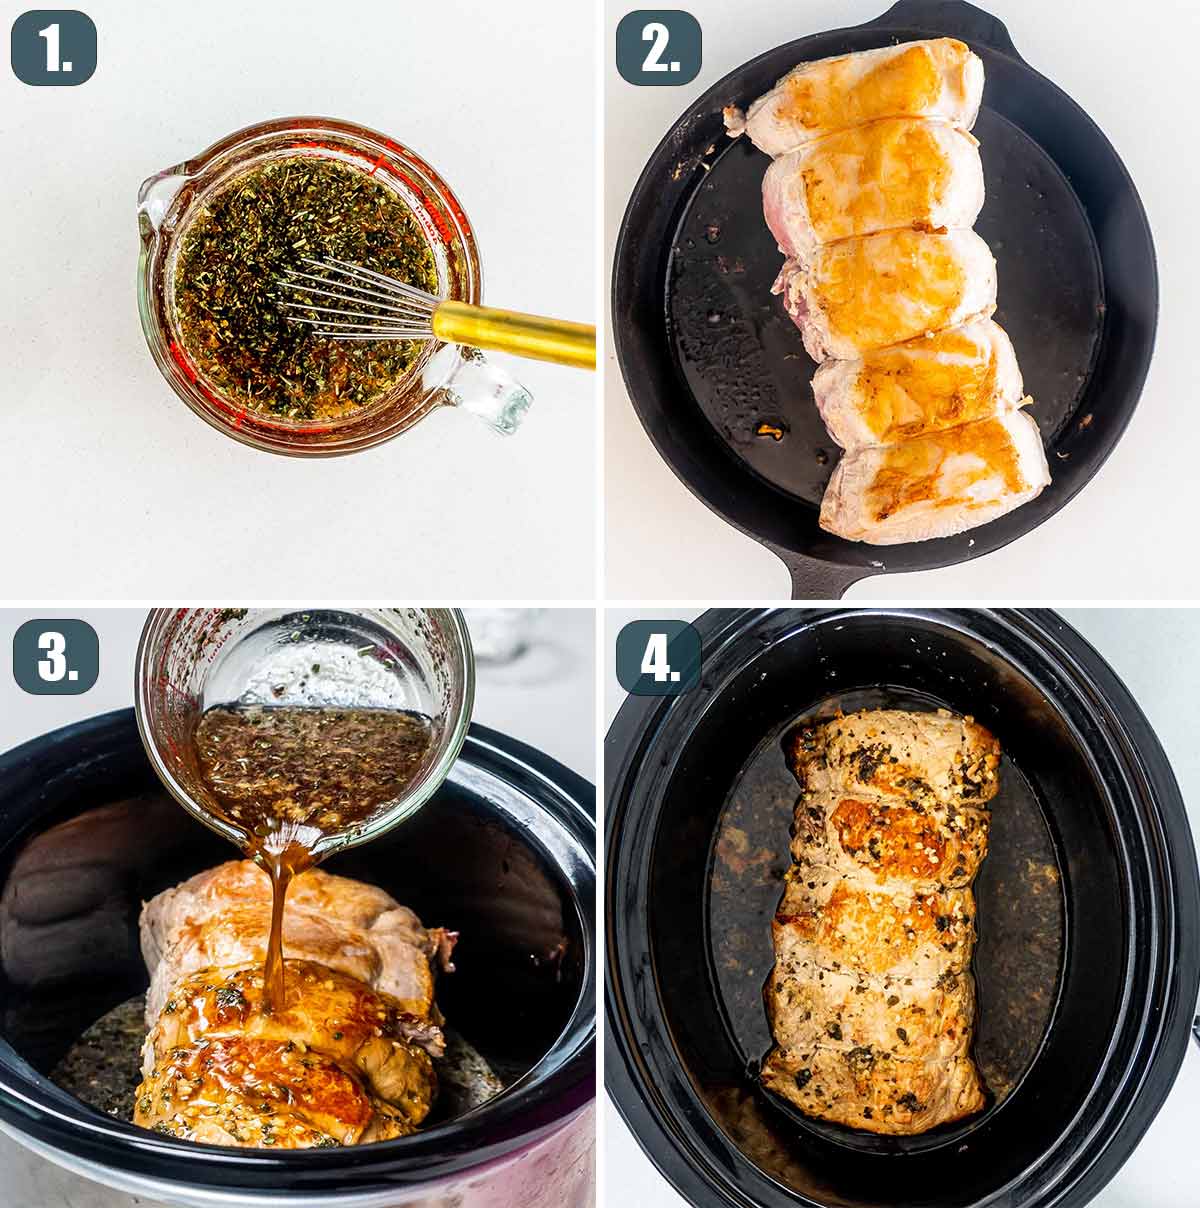 detailed shots of the process showing how to make a roast pork loin in the cooking pot.